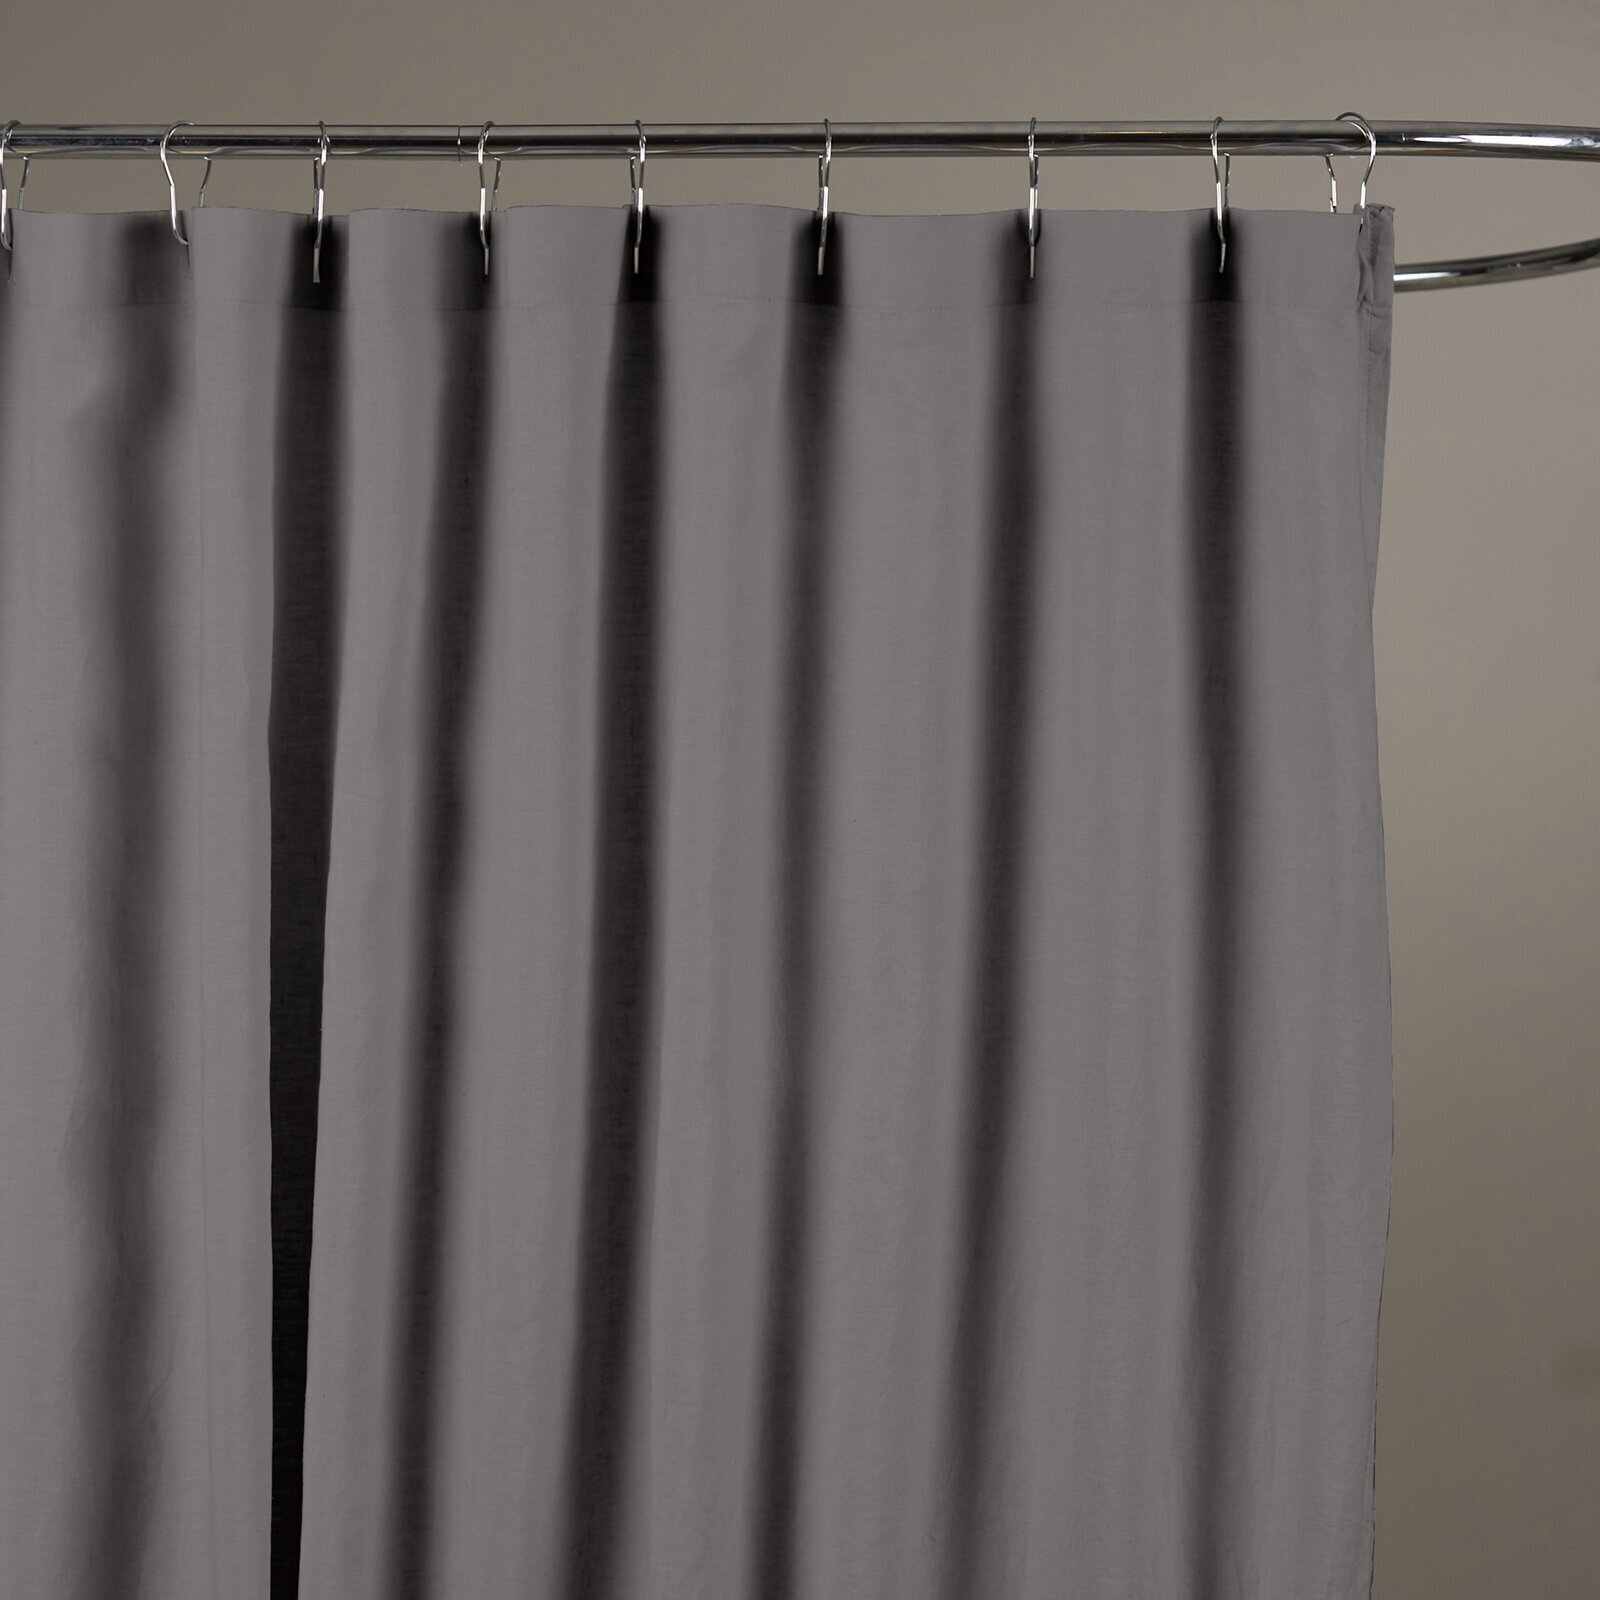 Expensive shower curtains made of linen